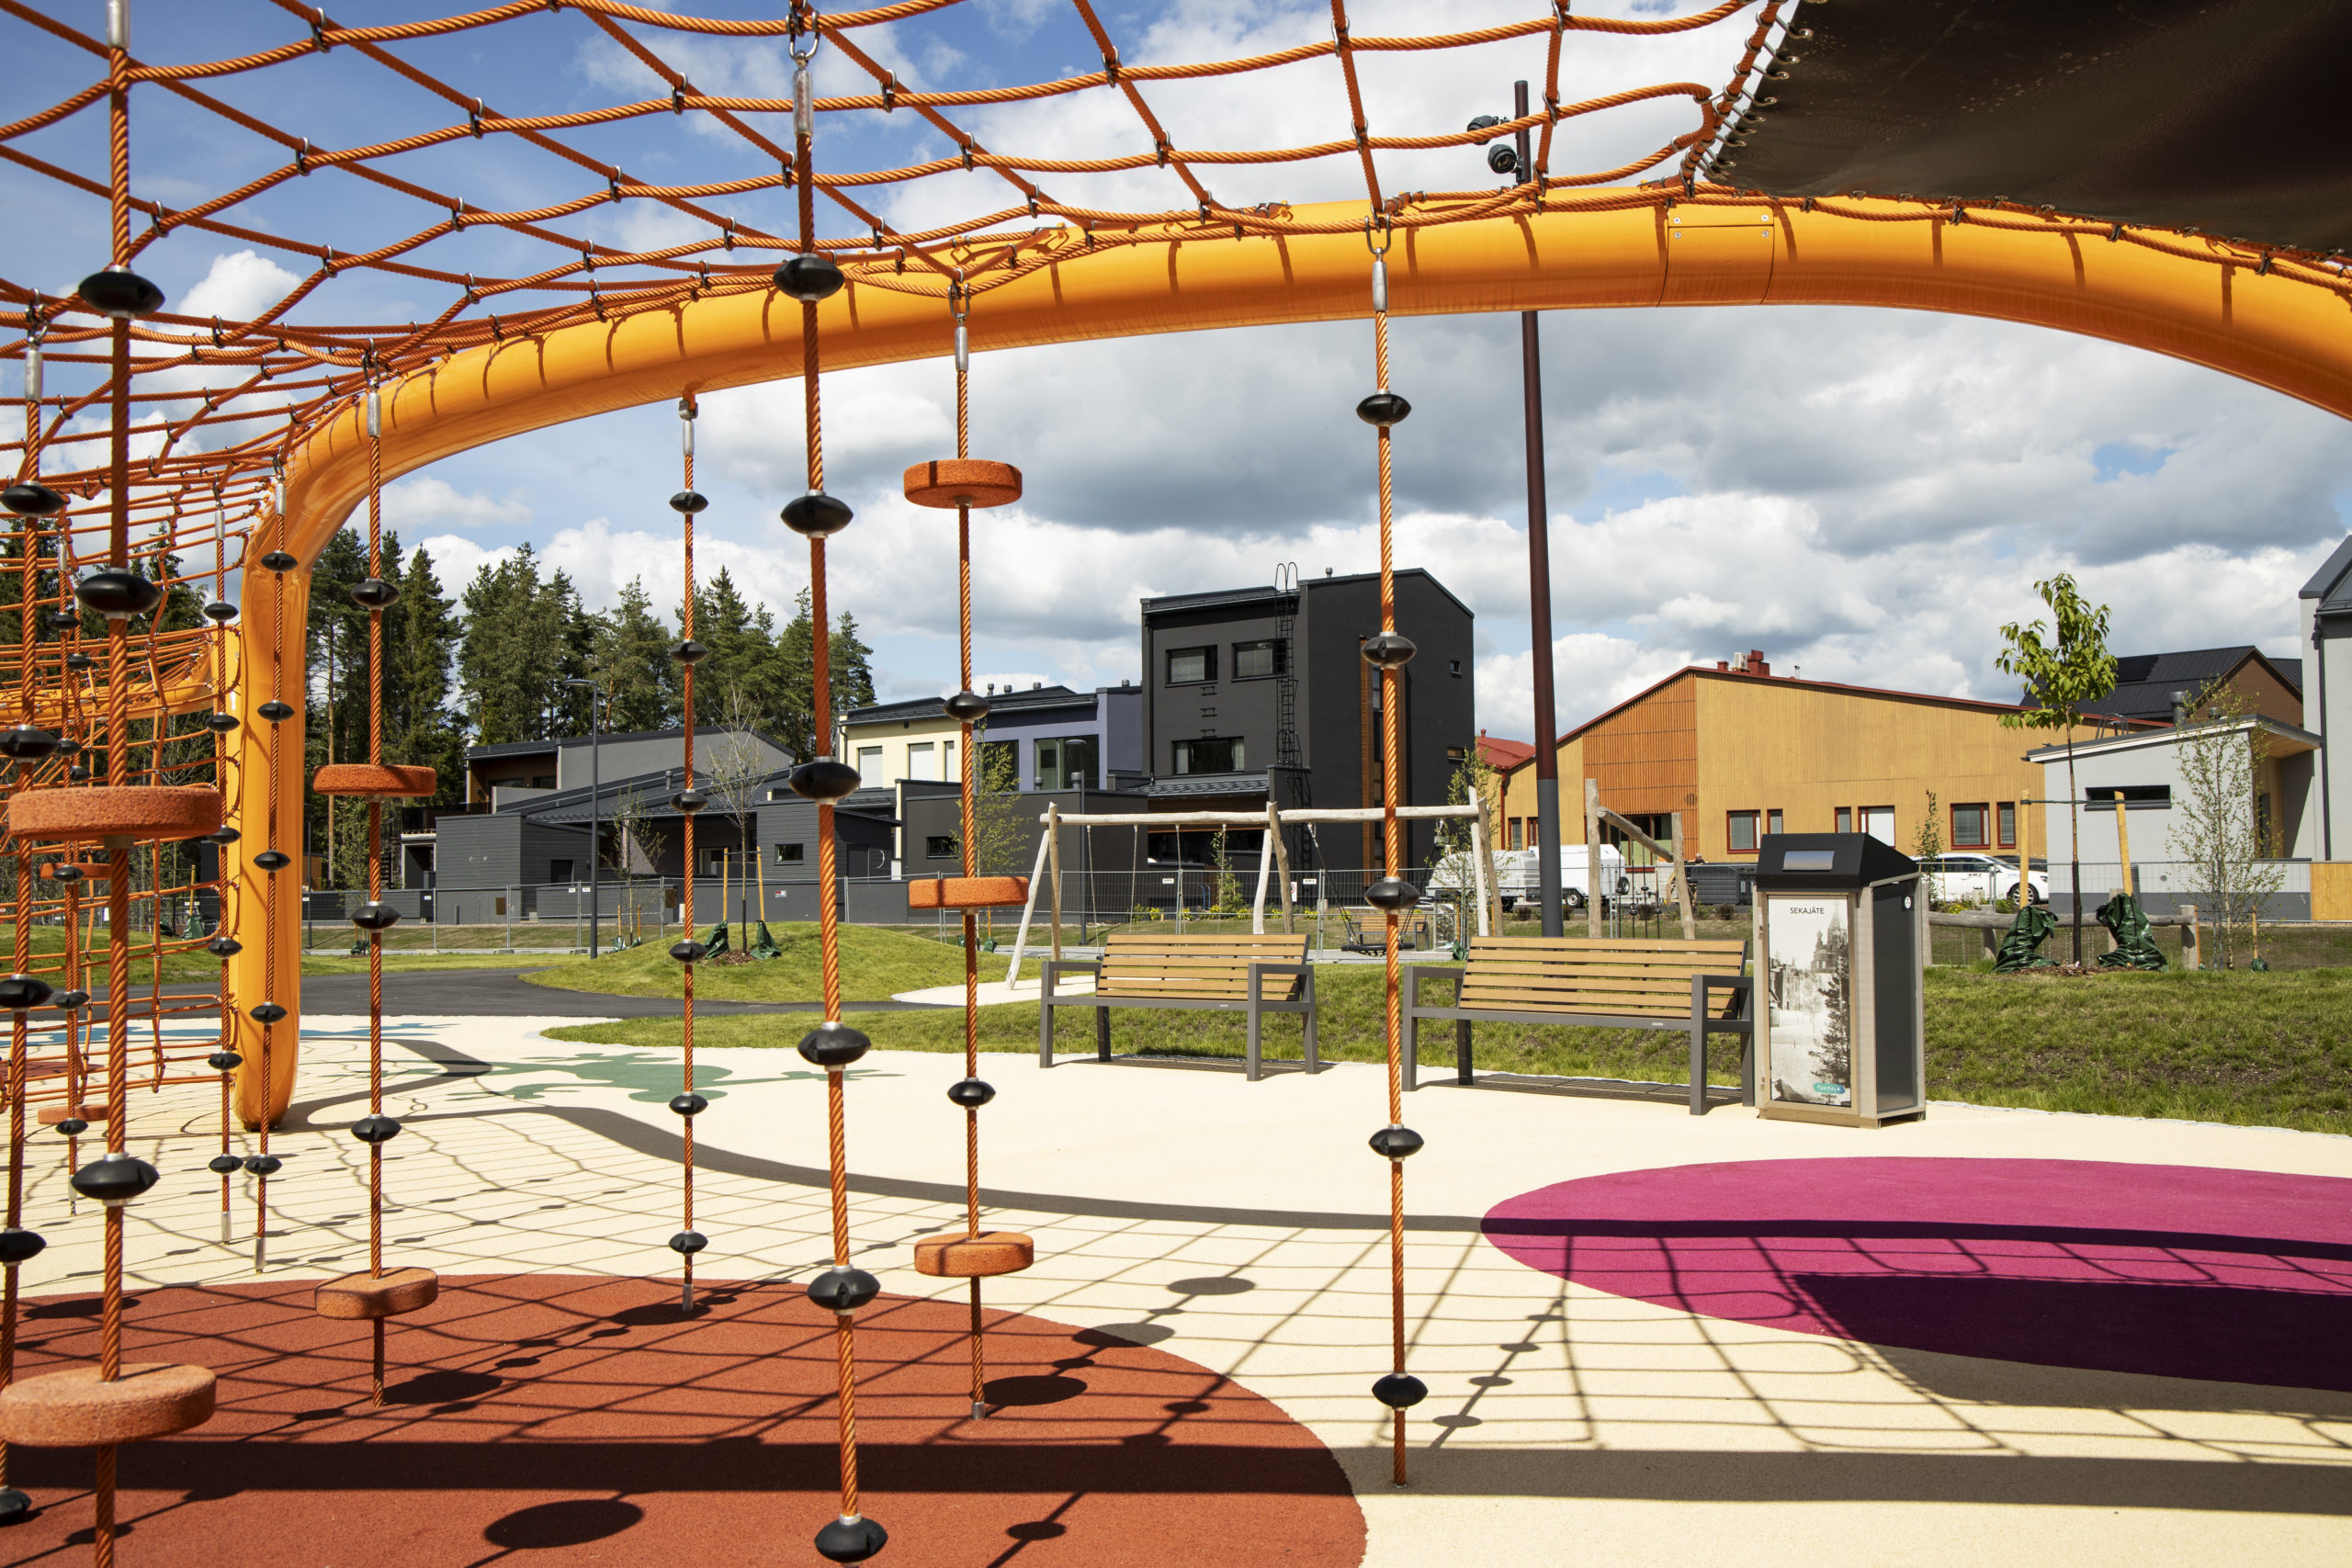 The Housing Fair opens its gates to the public on 3 August at the village  city of the future in Tuusula - Asuntomessut